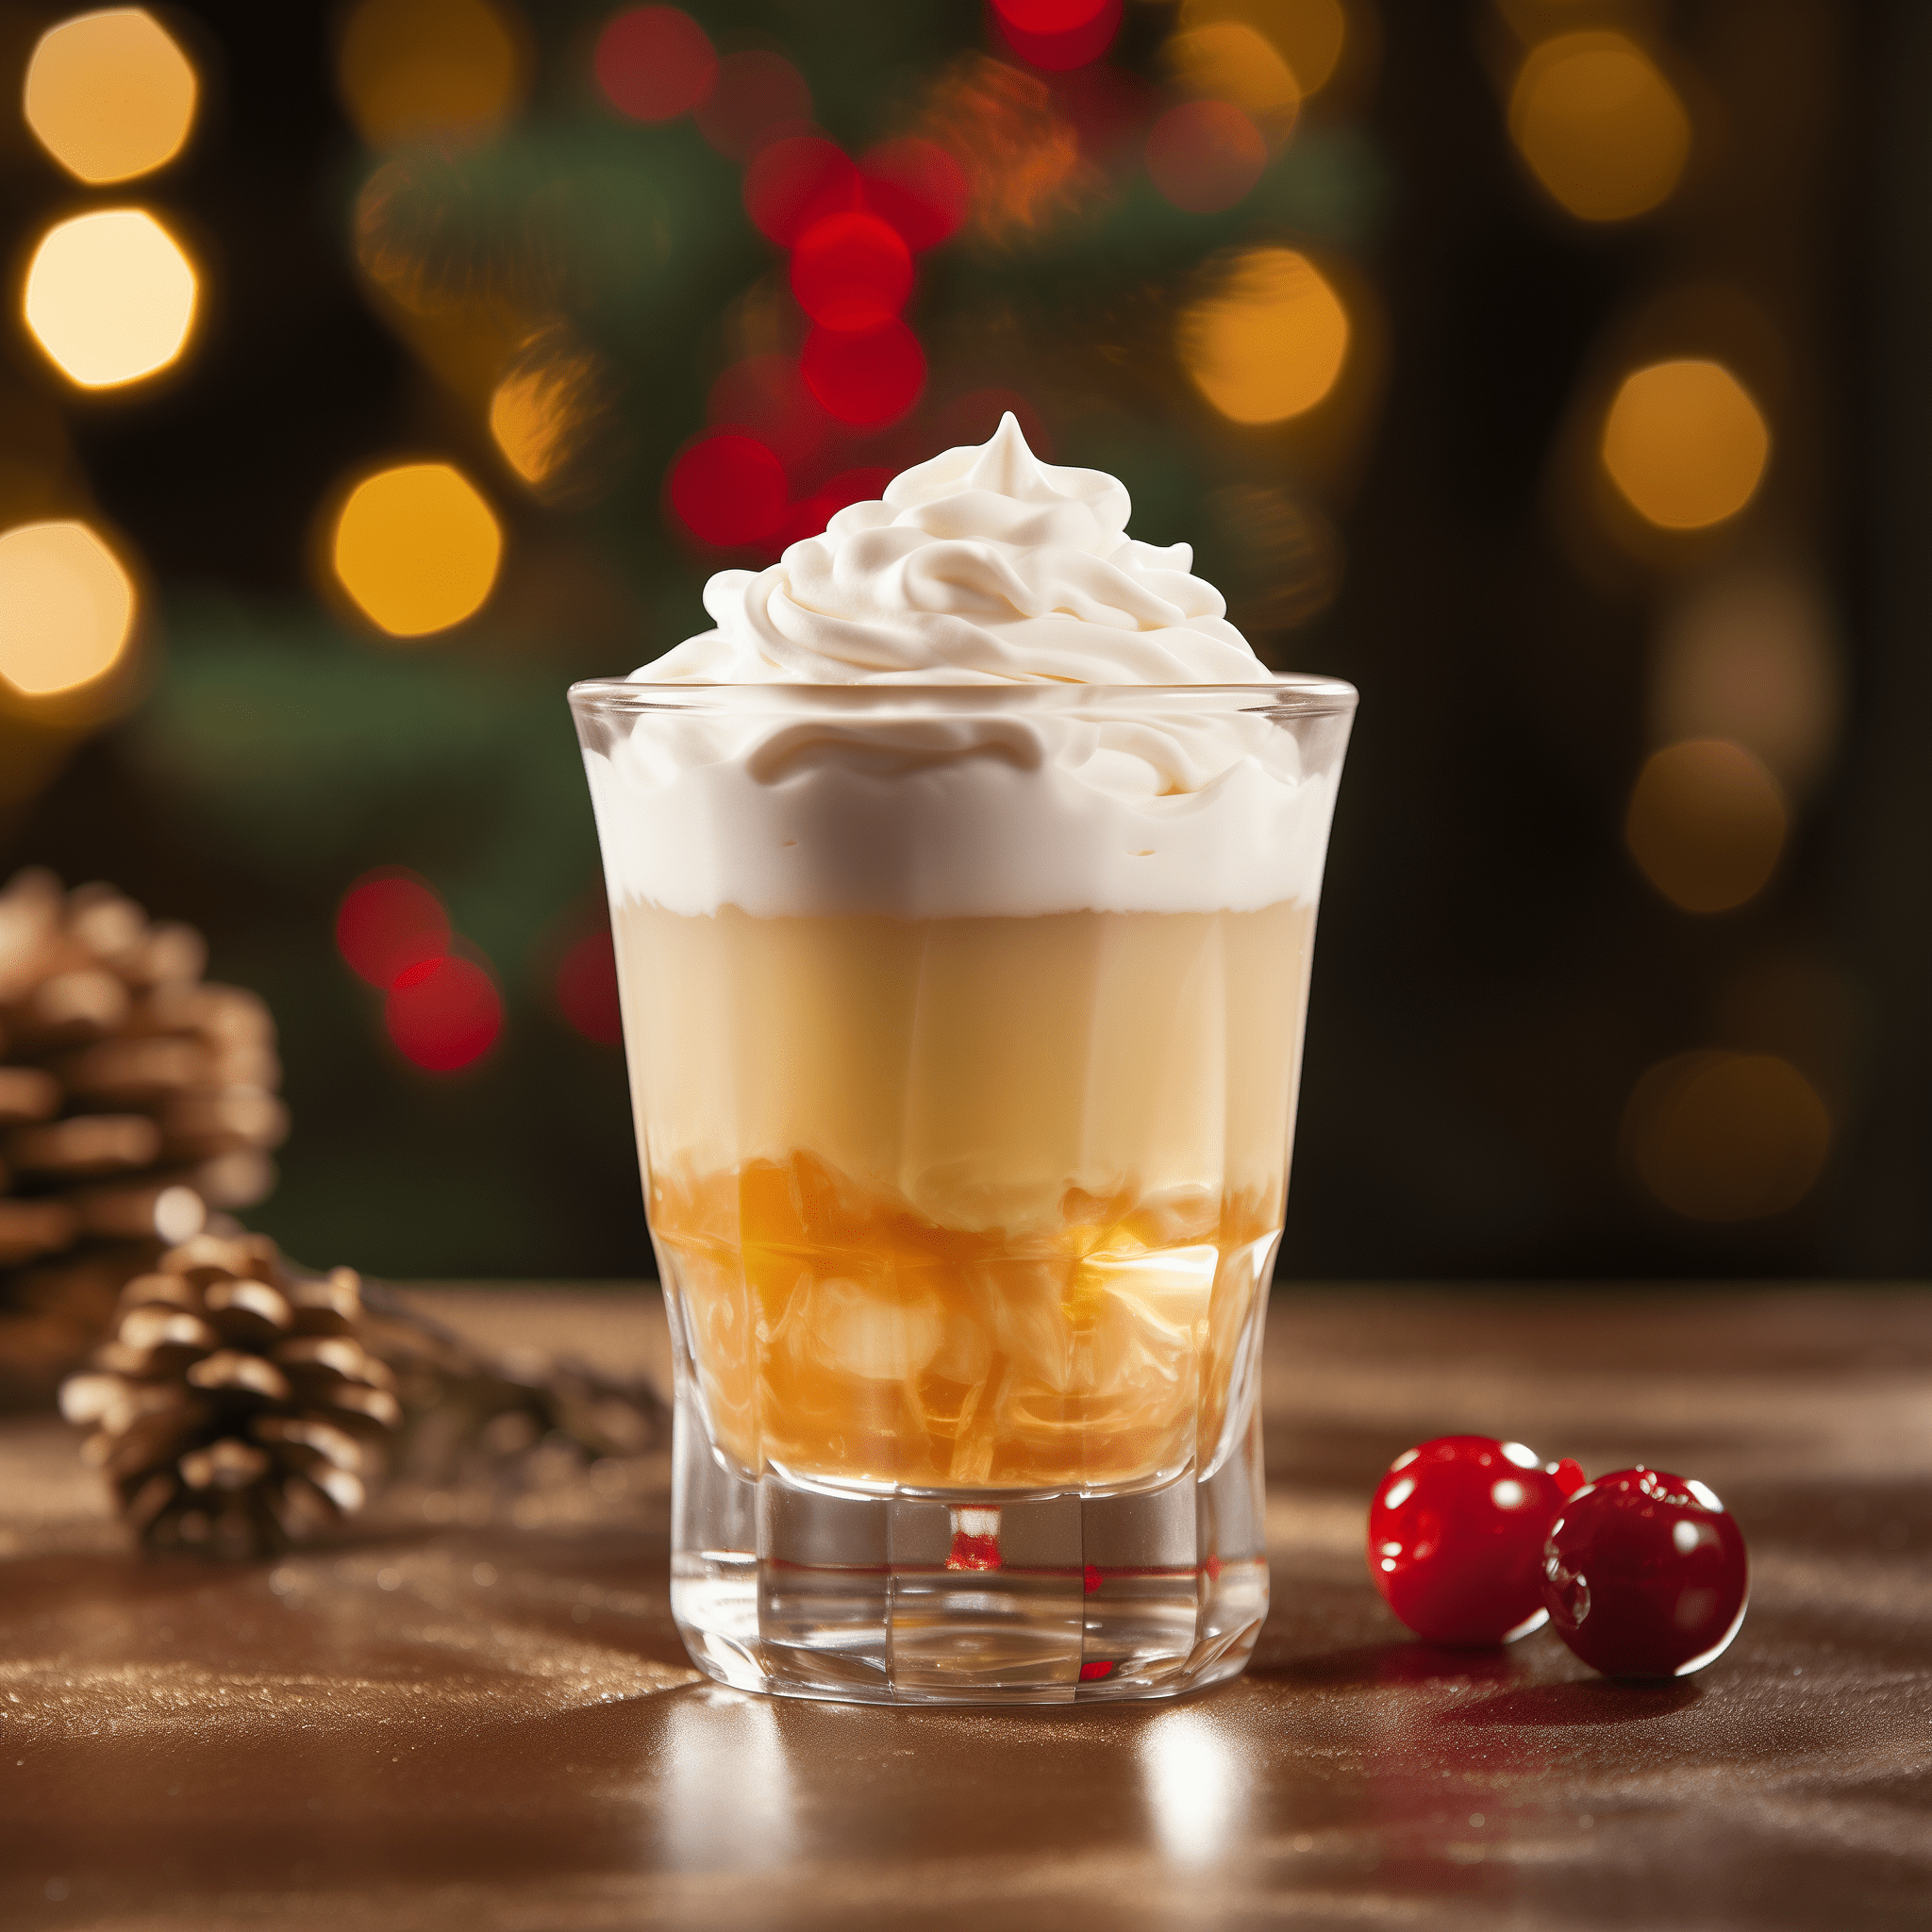 The Banana Split Shot is a sweet, creamy delight with a strong banana flavor complemented by the smoothness of whipped cream vodka. It's a rich and indulgent treat that's both comforting and playful.